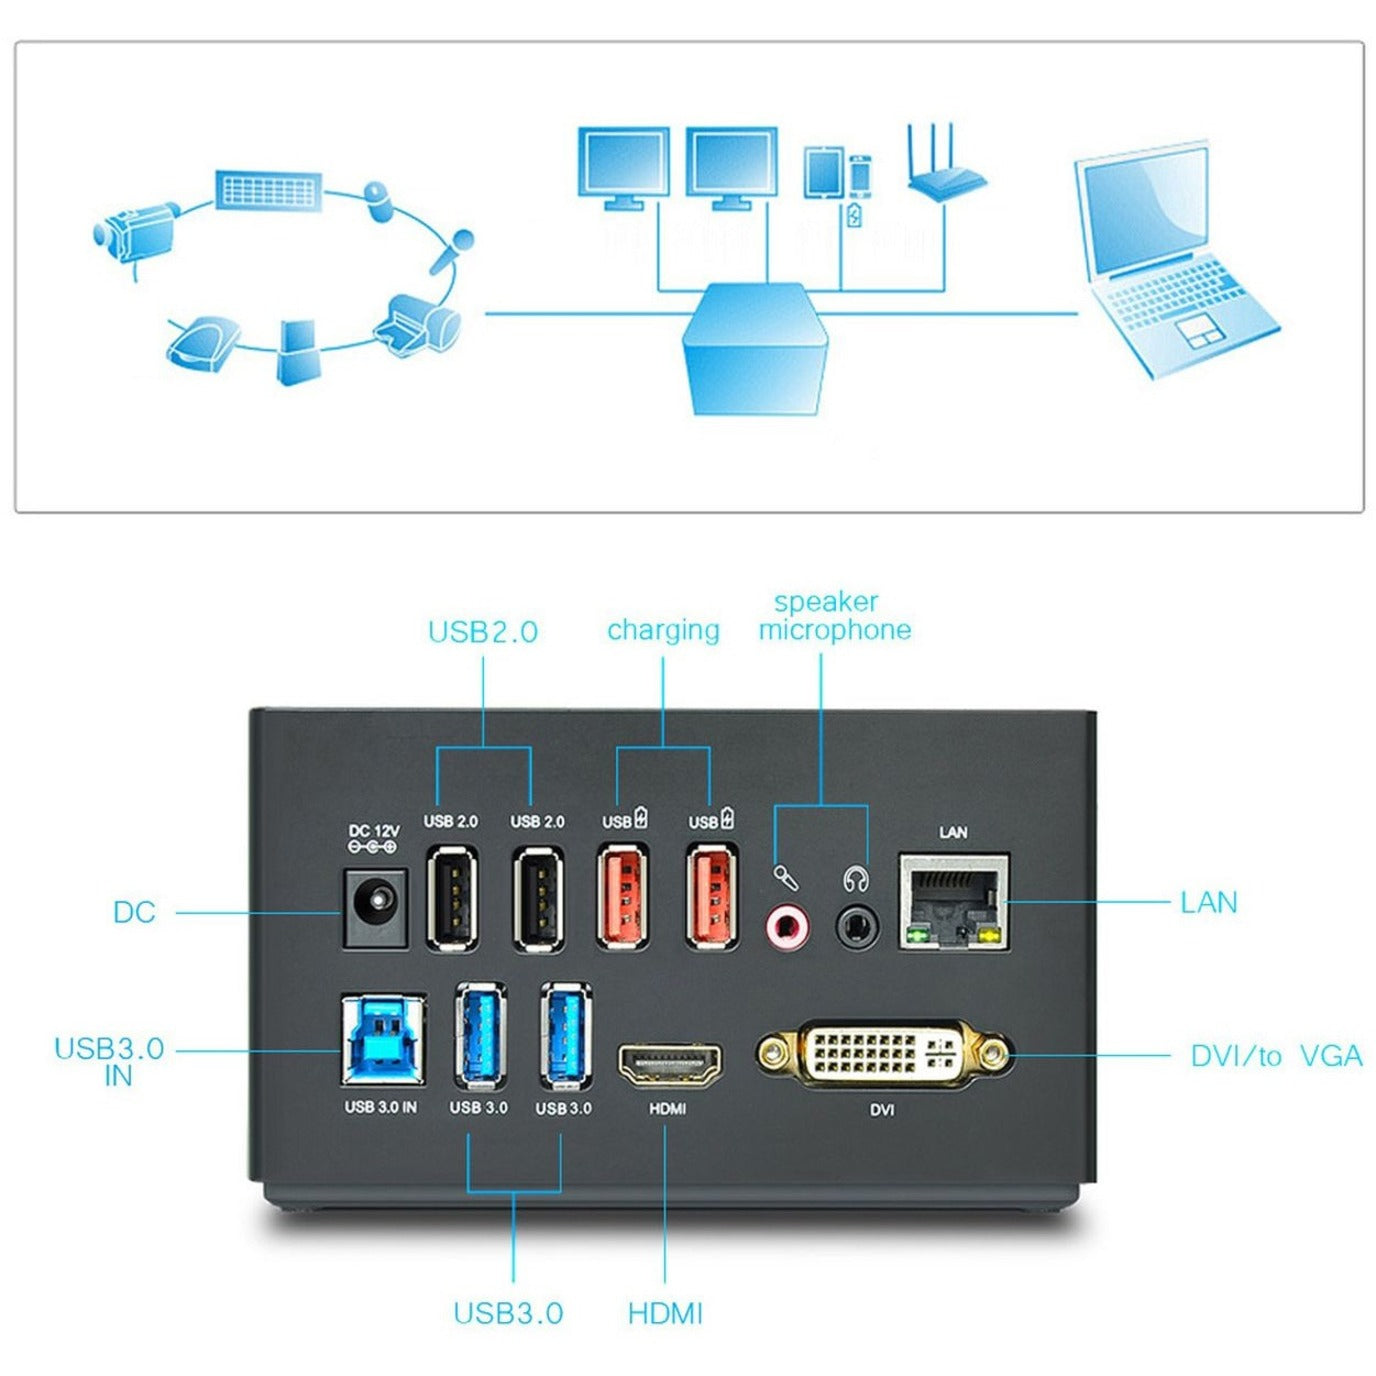 4XEM 4XUG39DK3 USB 3.0 Universal Docking Station Deluxe, 6 USB Ports, DVI, HDMI, RJ-45, Audio In/Out